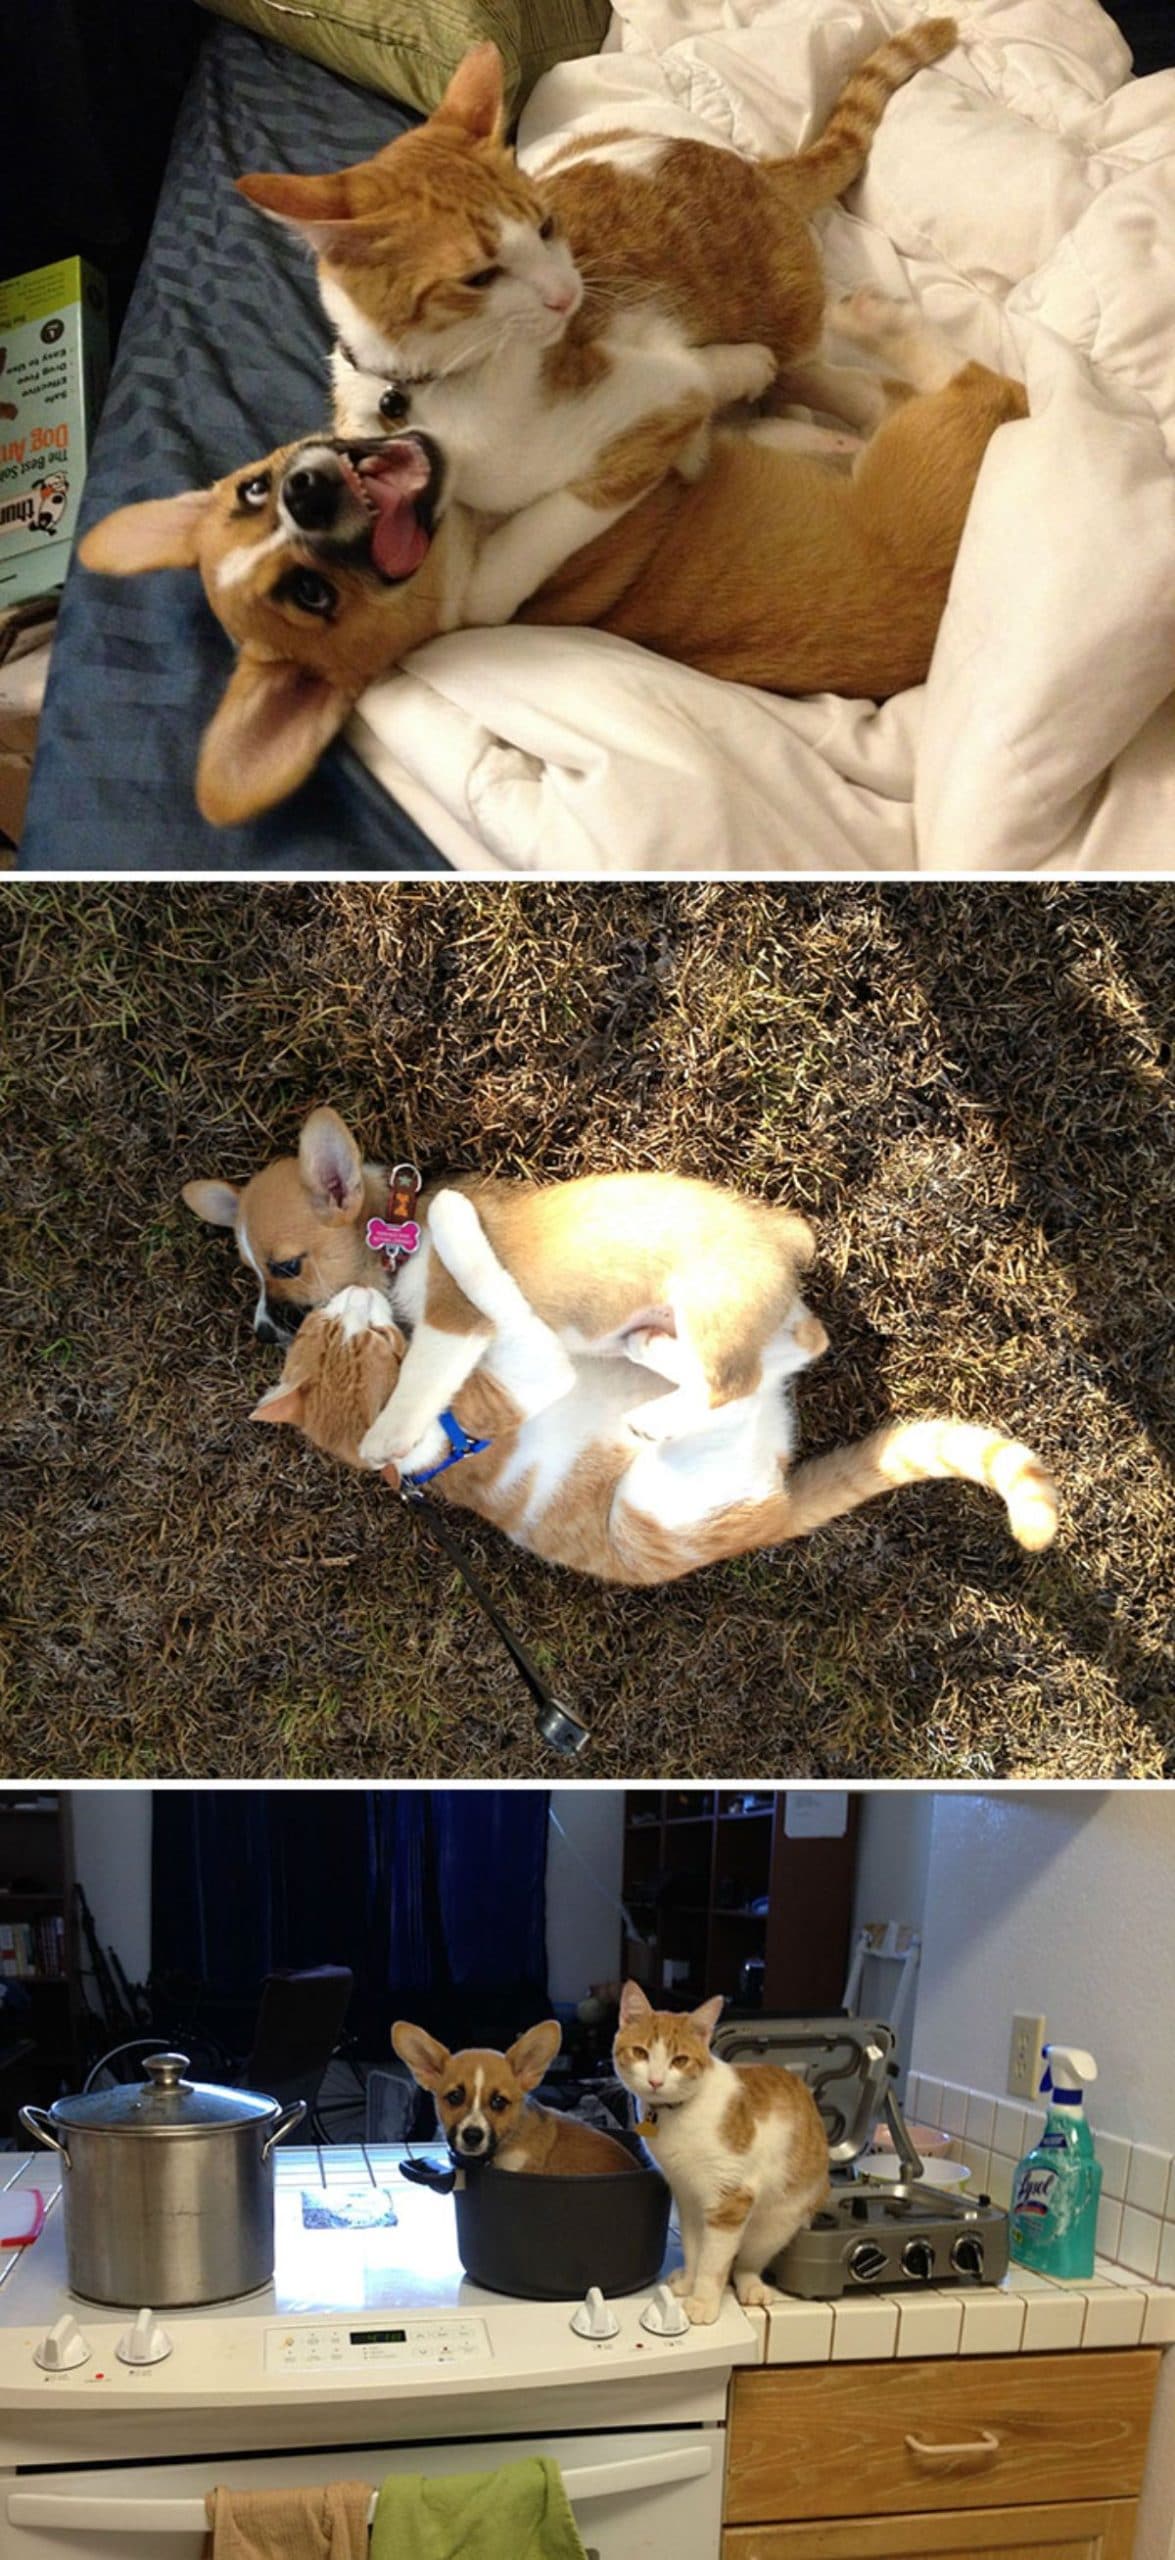 3 photos of a brown and white corgi puppy and an orange and white cat playing together